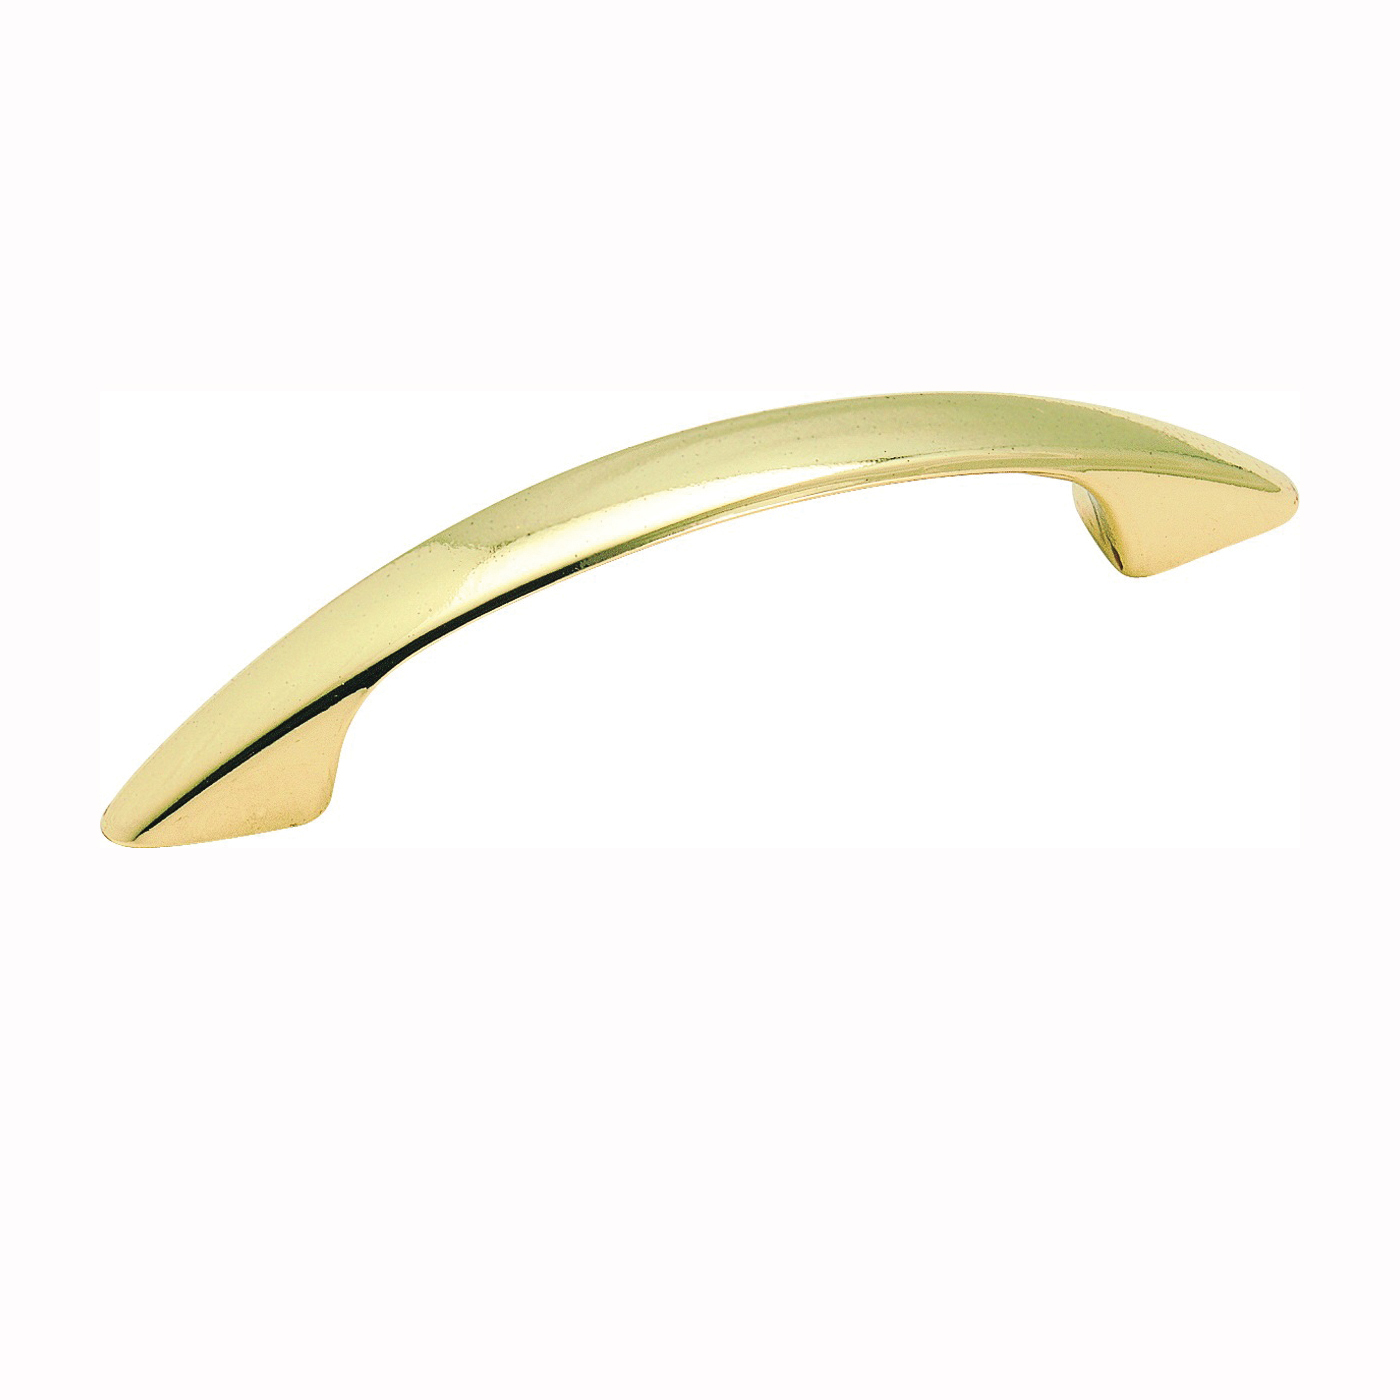 Amerock BP34163 Cabinet Pull, 4-1/16 in L Handle, 3/4 in H Handle, 3/4 in Projection, Zinc, Polished Brass